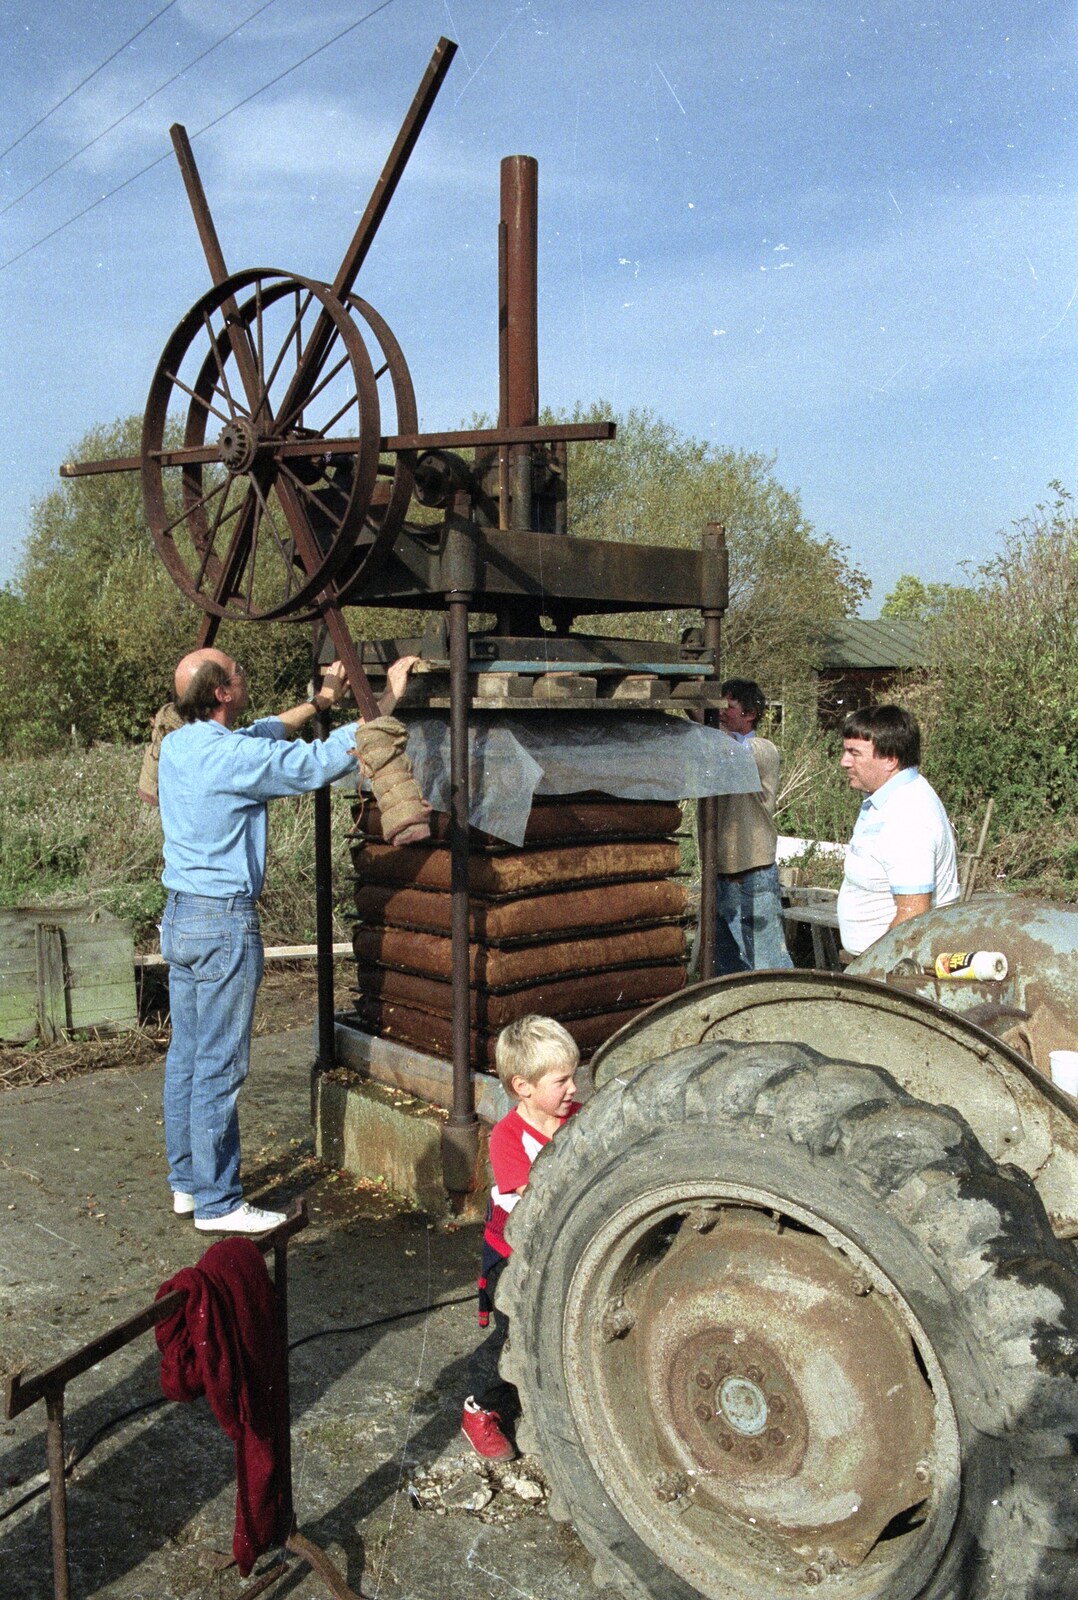 Plastic is put on the top of the cheeses from The Annual Cider Making Event, Stuston, Suffolk - 11th October 1990